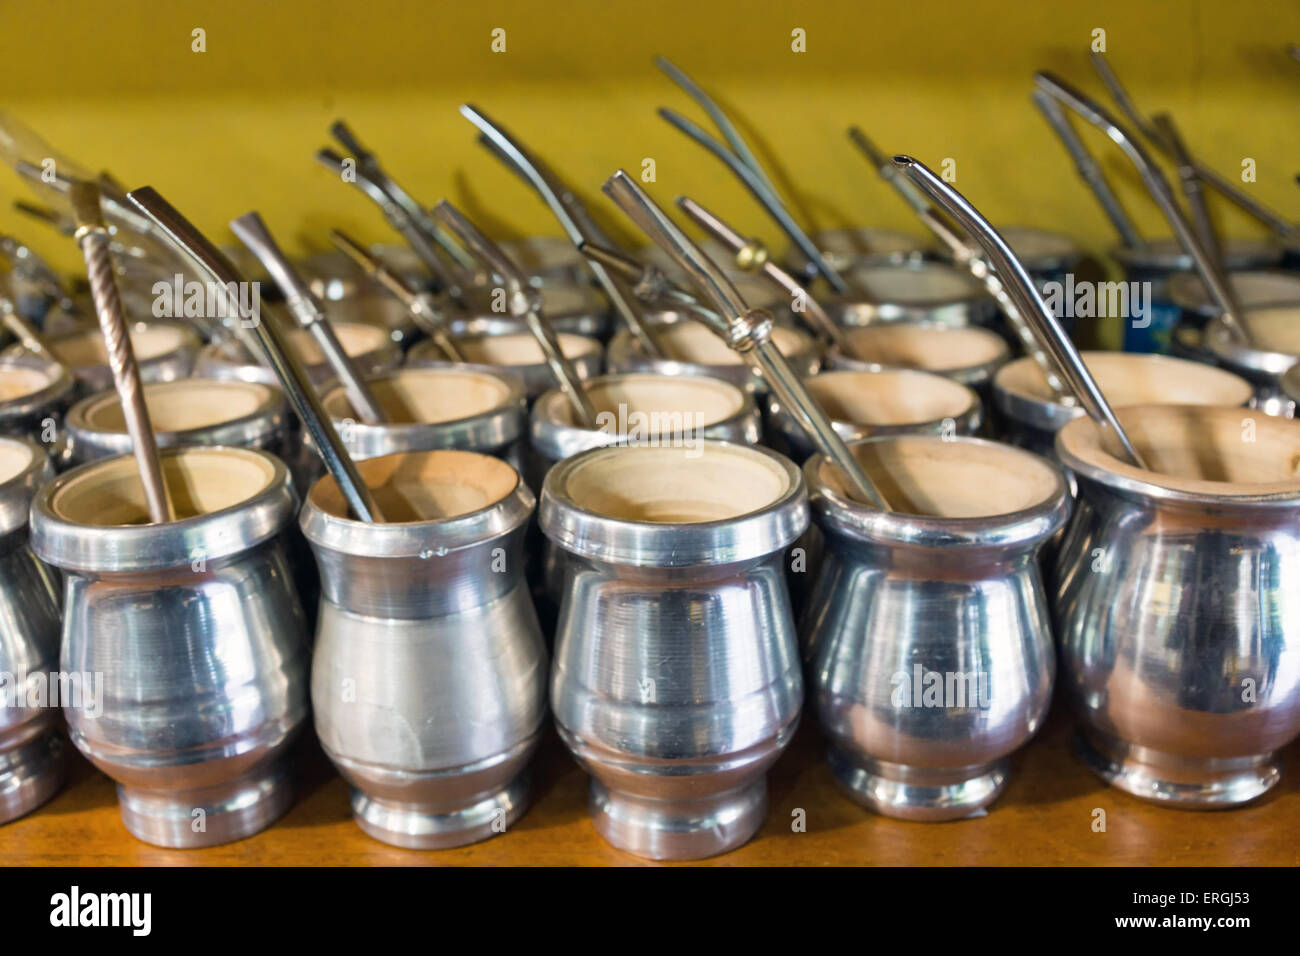 A selection of mate cups seen in Argentina Stock Photo